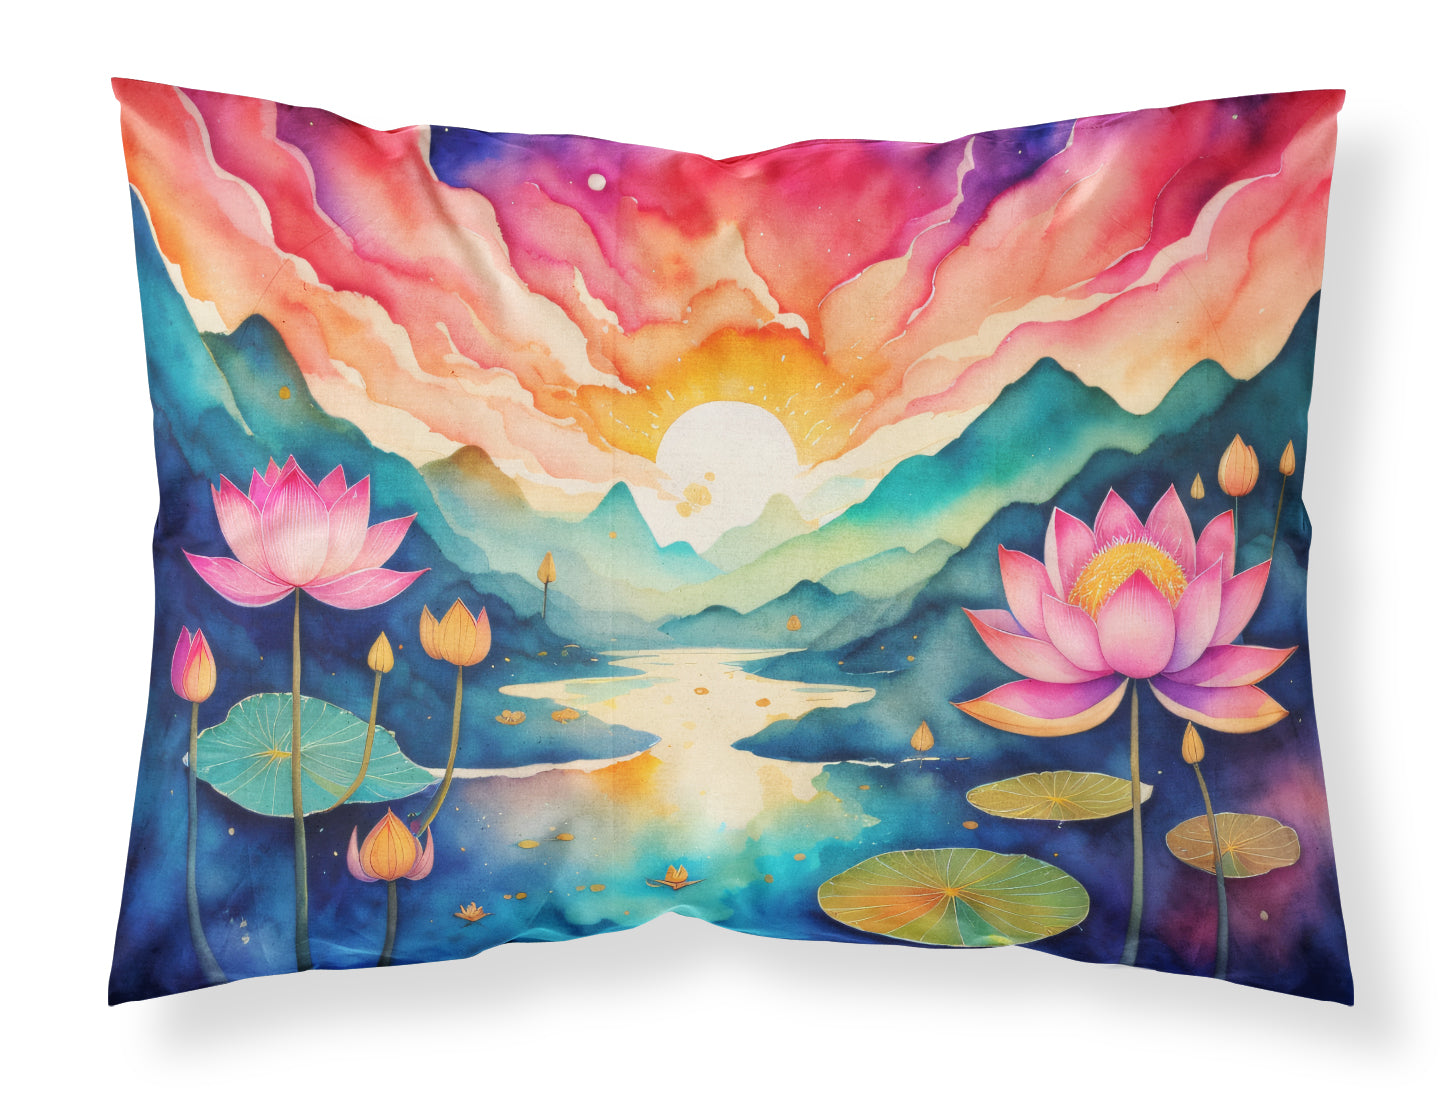 Buy this Lotus in Color Fabric Standard Pillowcase